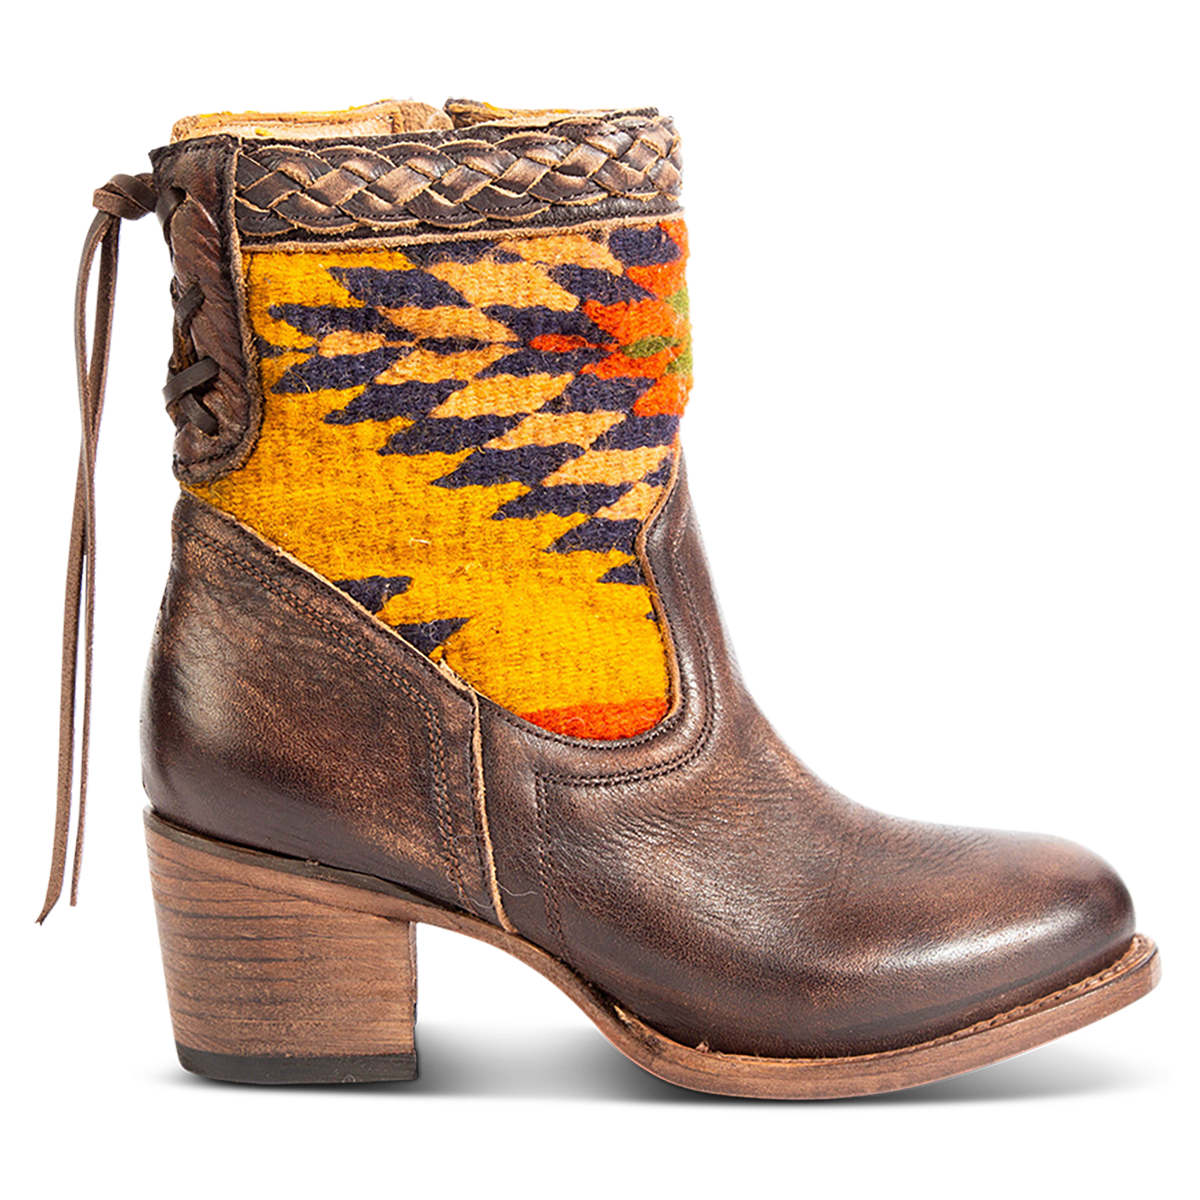 FREEBIRD women's Songbird brown leather bootie with woven detailing, leather tie lacing and an inside working brass zip closure